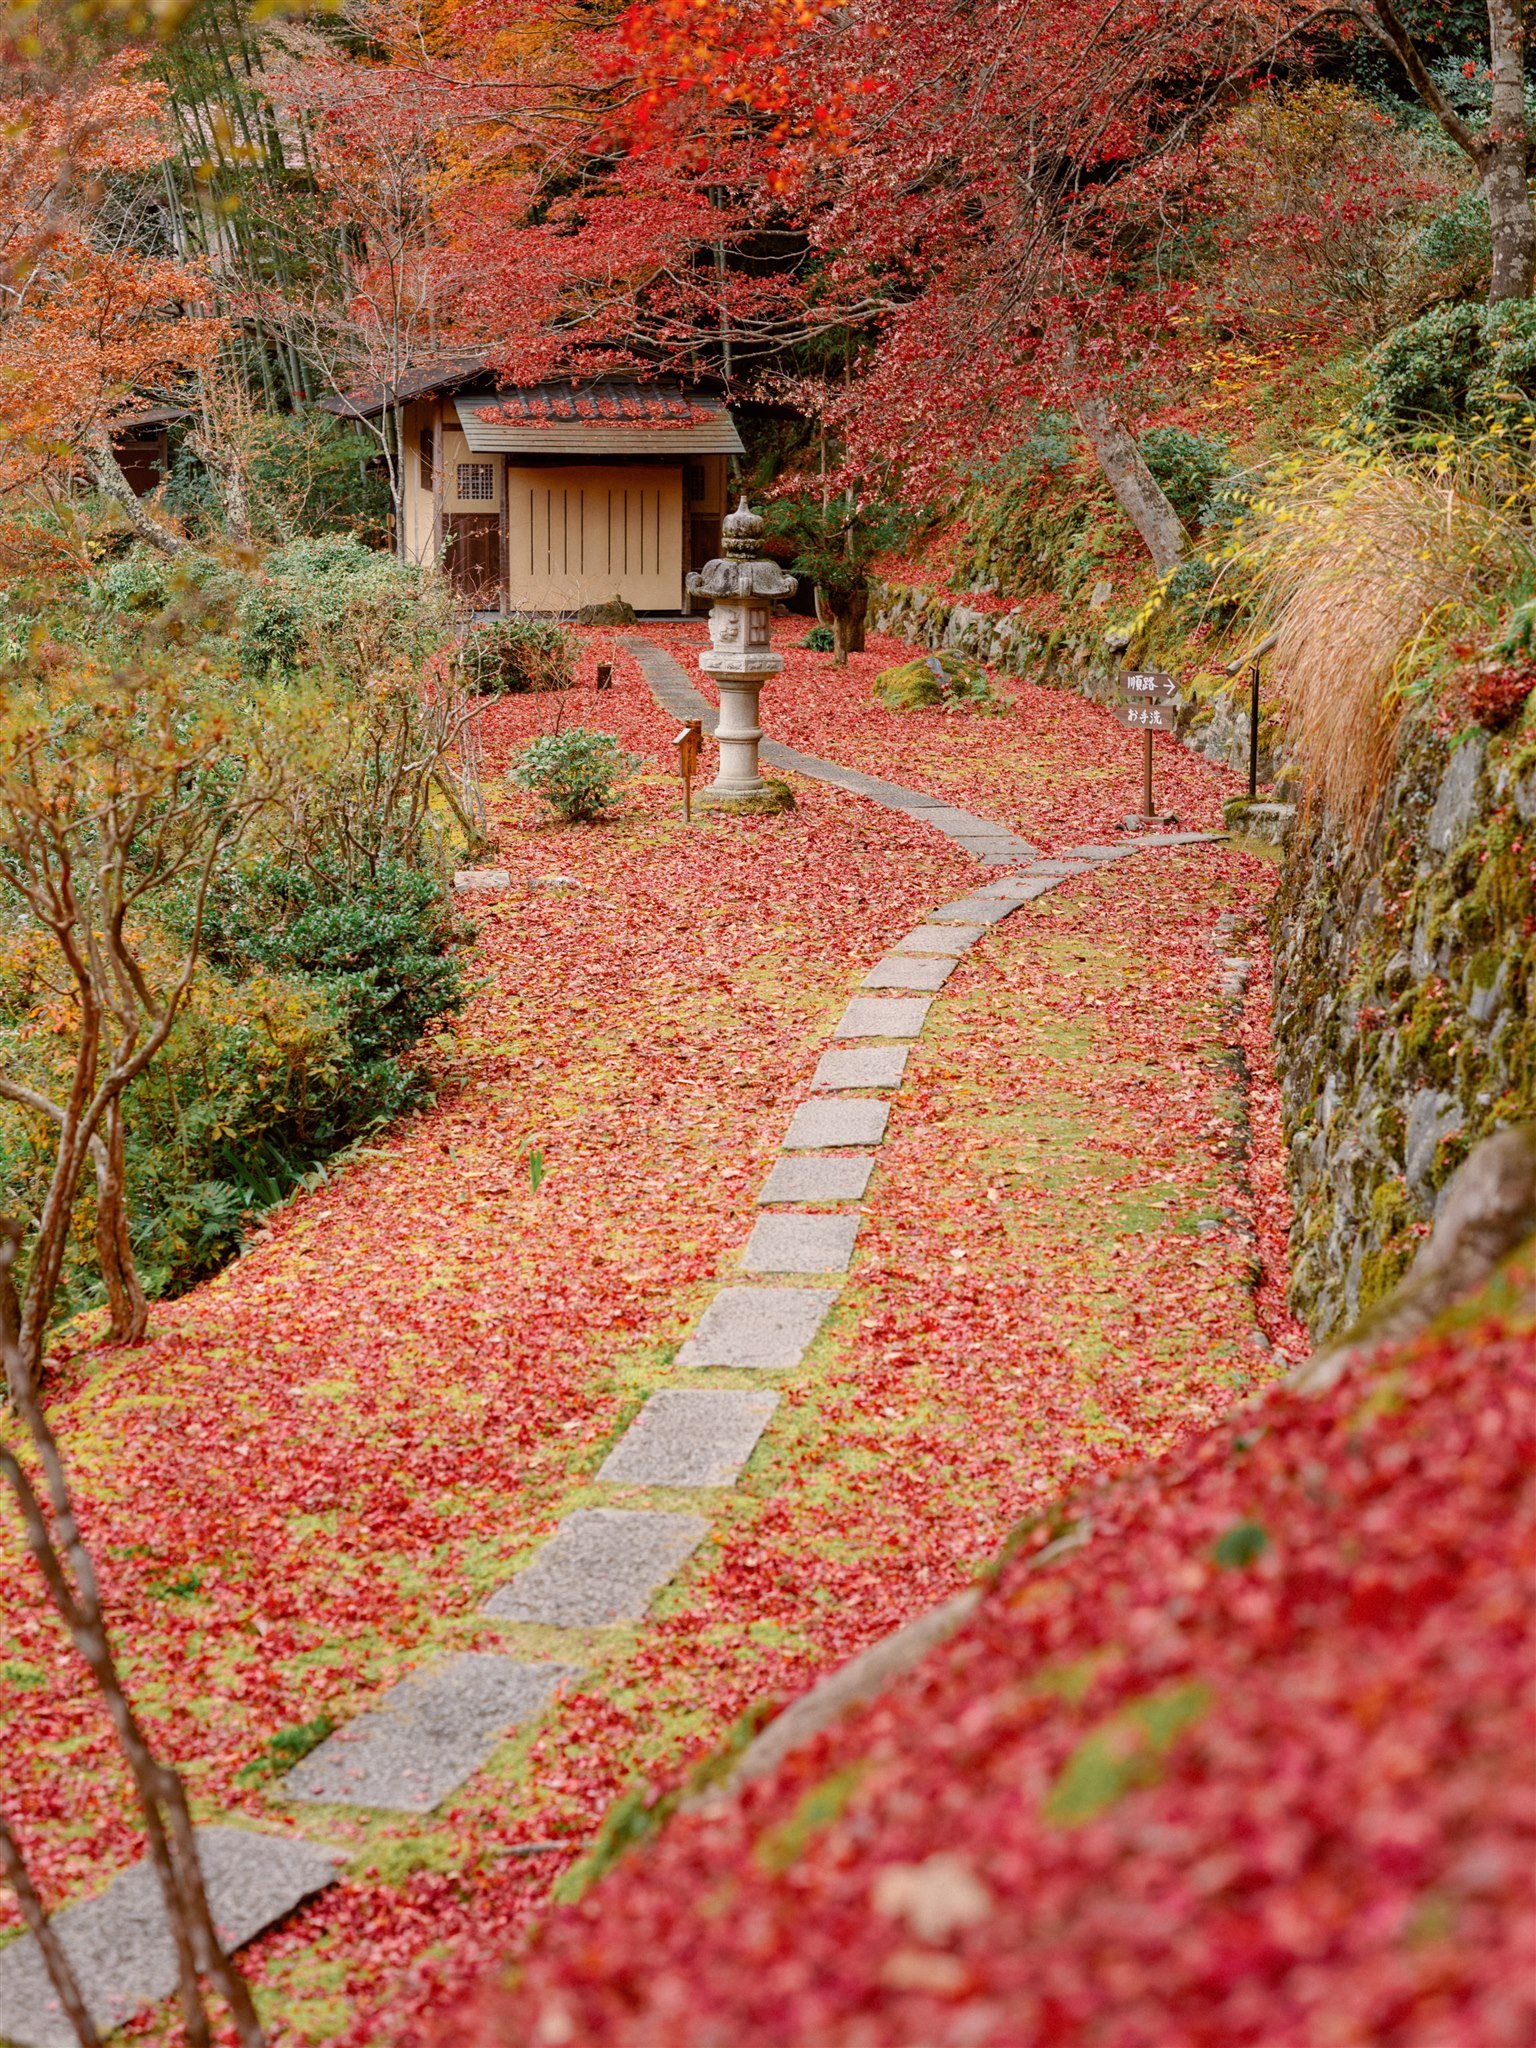 Vibrant red leaves fill the ground at the Japanese garden. 